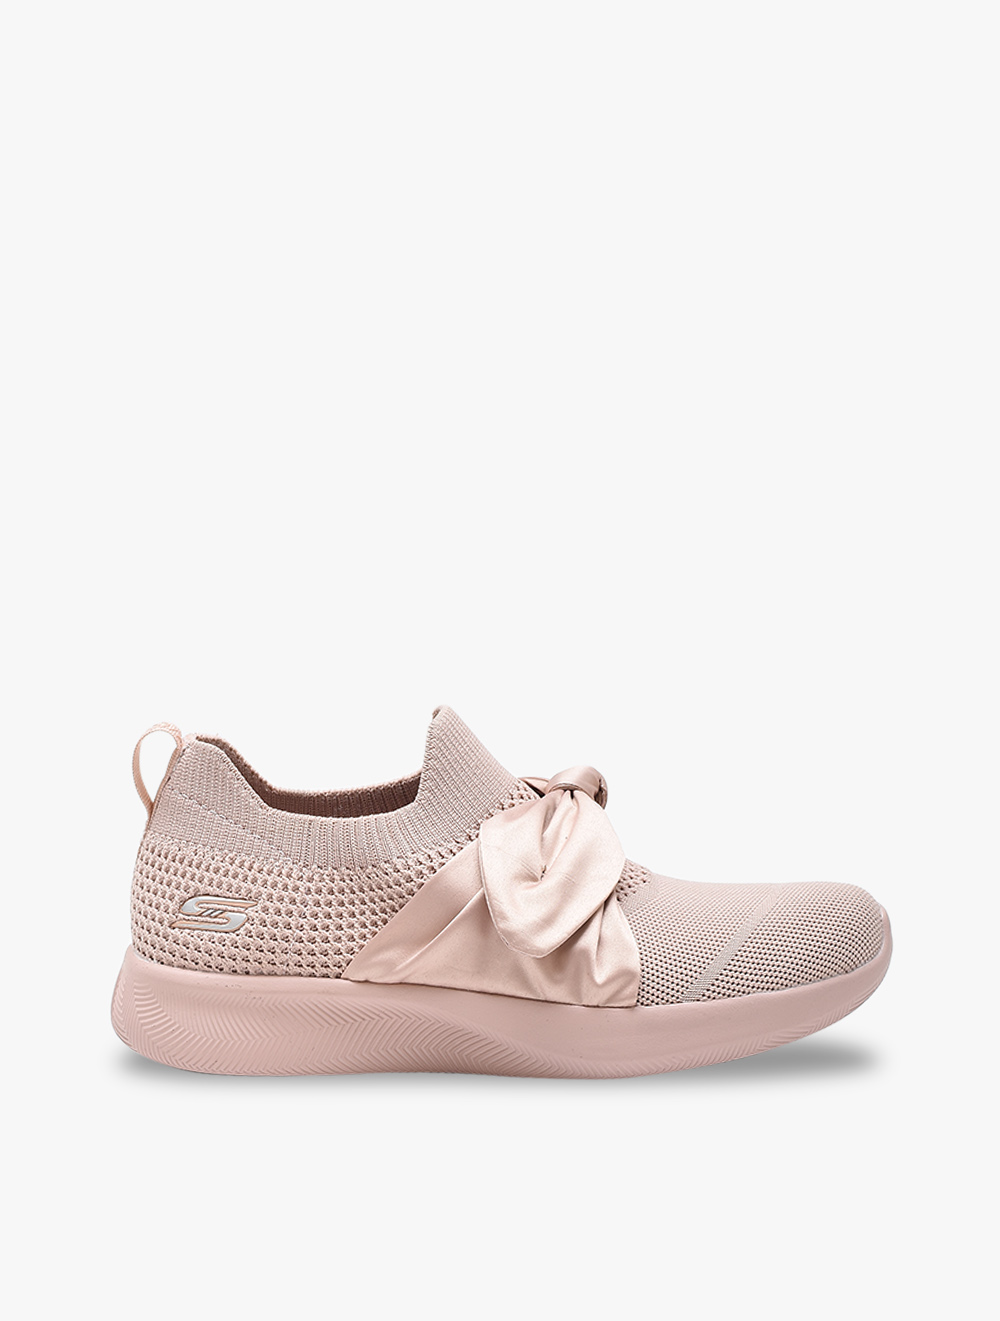 skechers shoes with bows